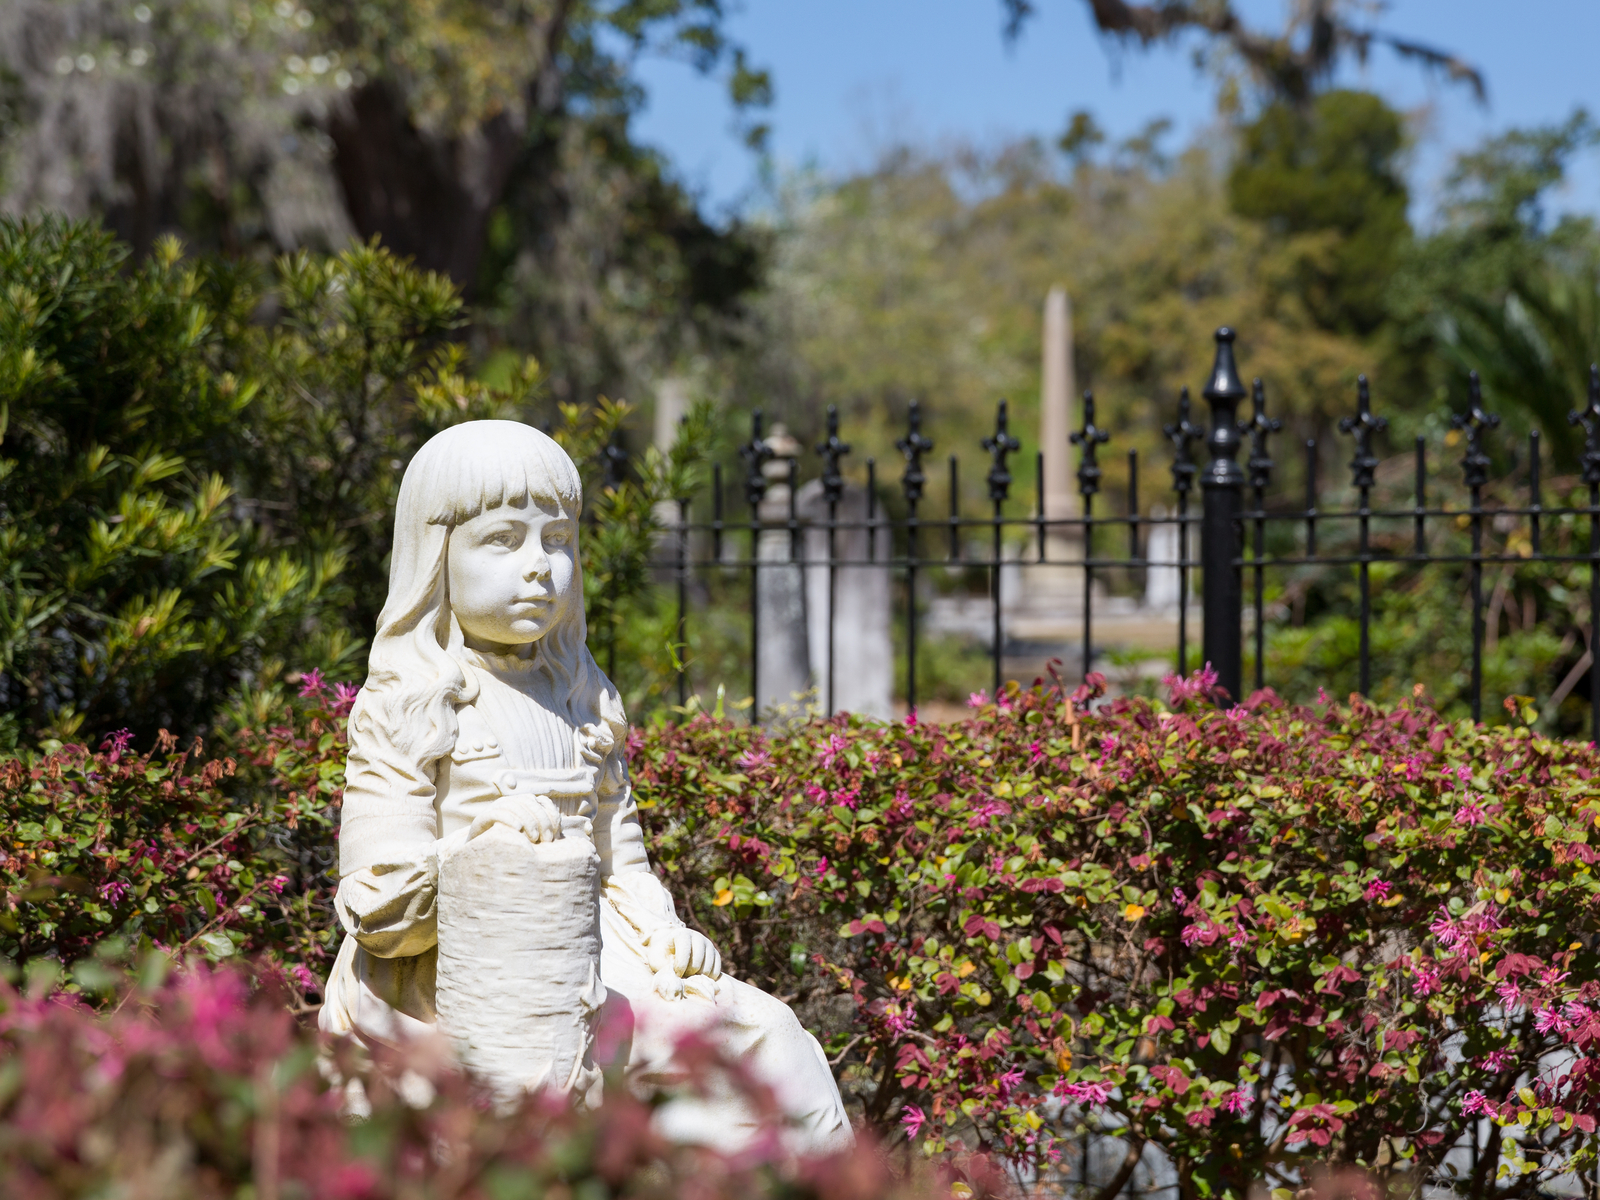 Gracie ghost tour, one of the best things to do in Savannah, GA